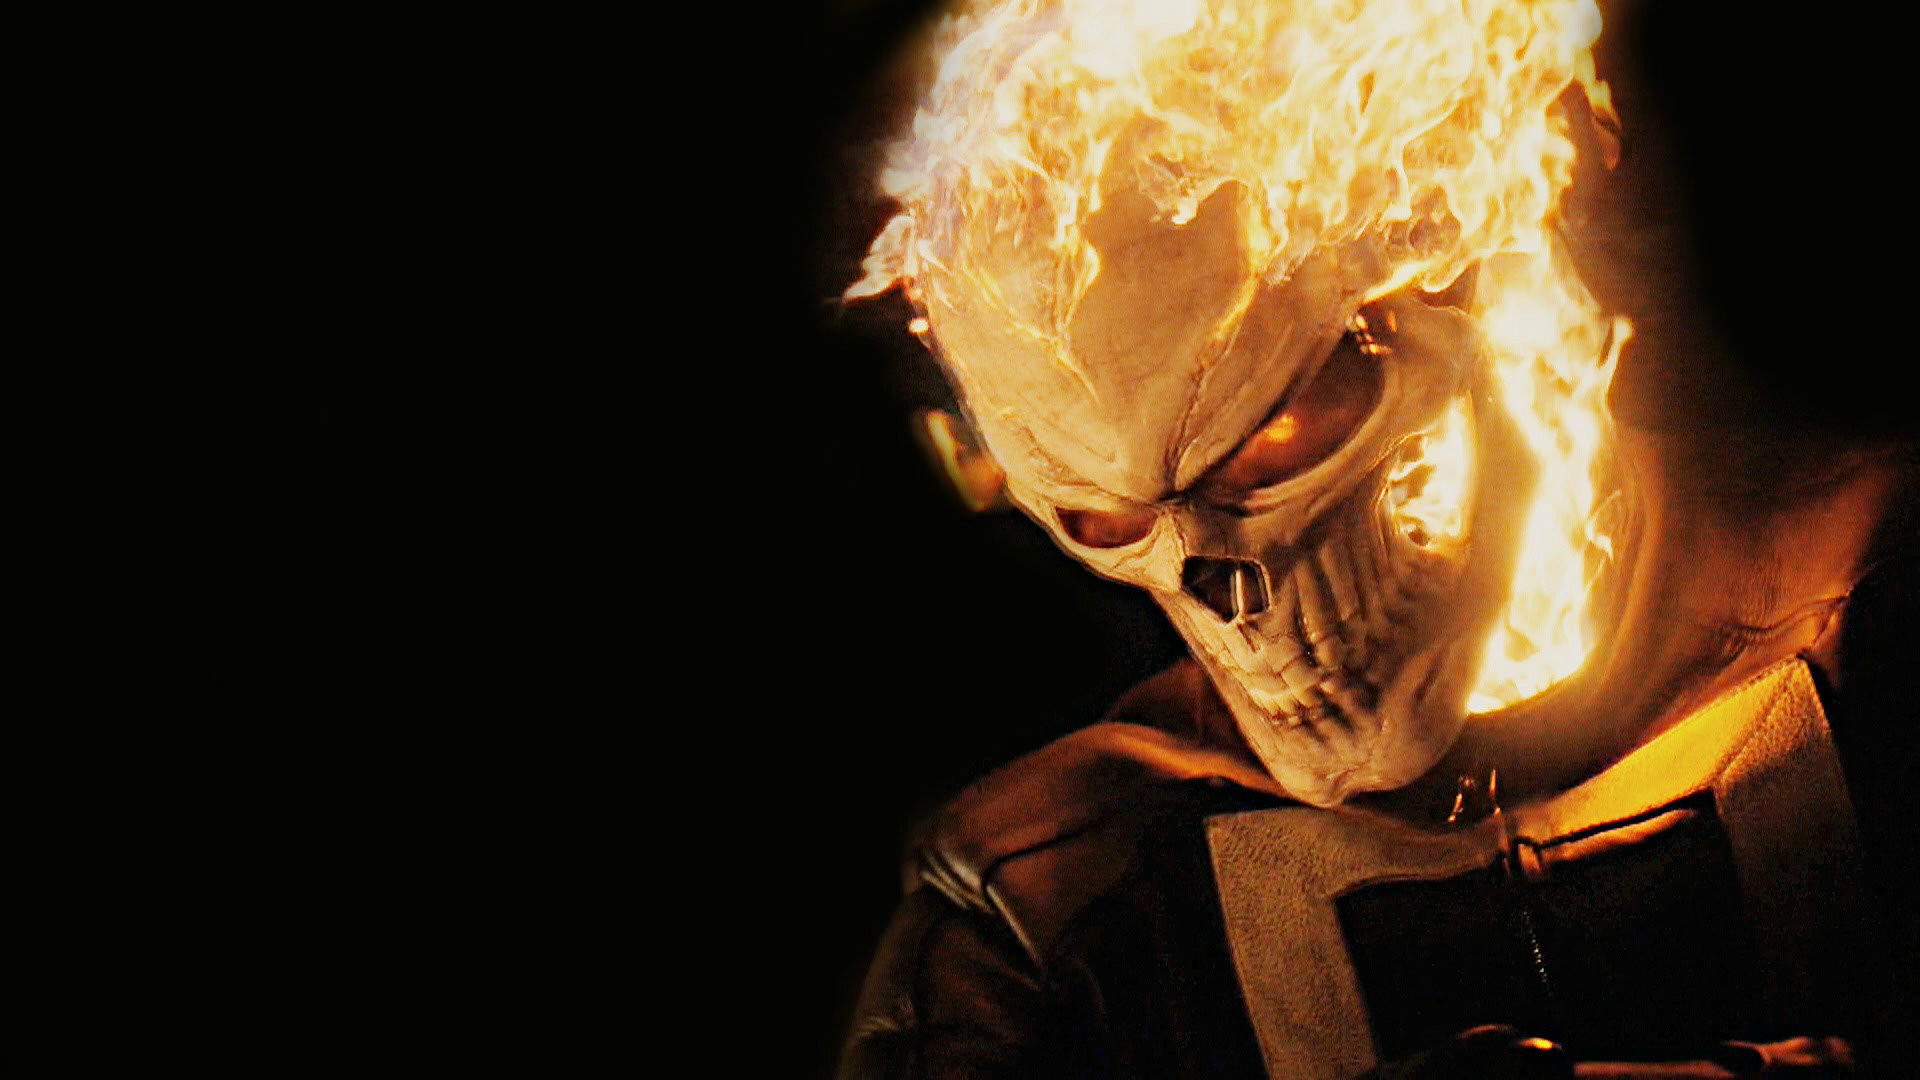 1920x1080 Ghost Rider could be spinning off into his own Netflix series or film -  GAMBIT